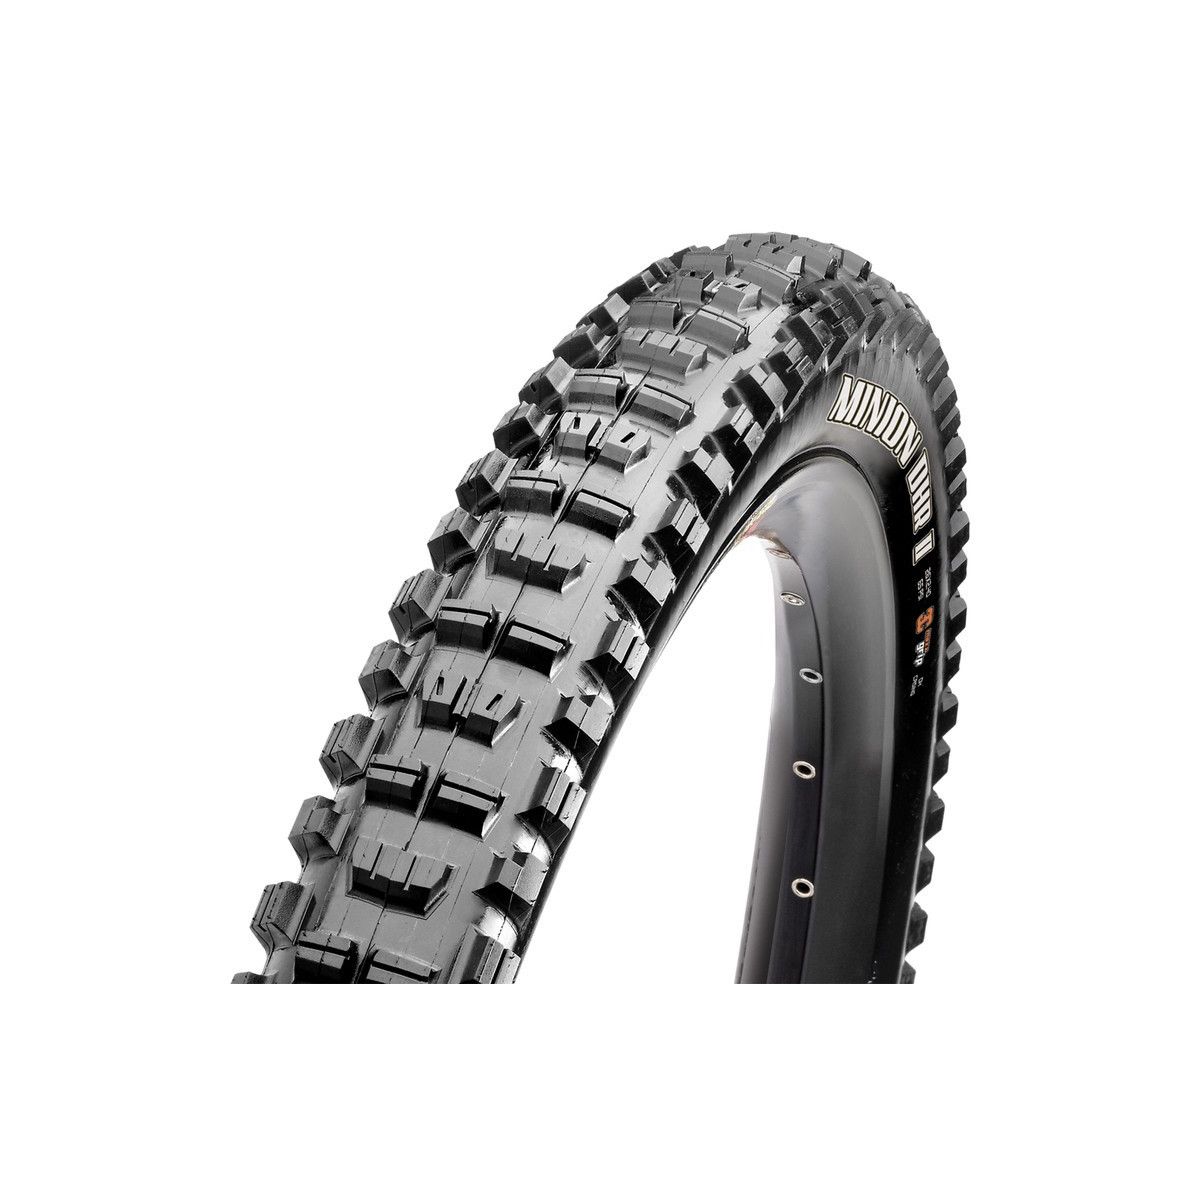 Maxxis Minion trasero 2 3C EXO Tubeless ready 27.5"x2.40 DHR DHF compar online